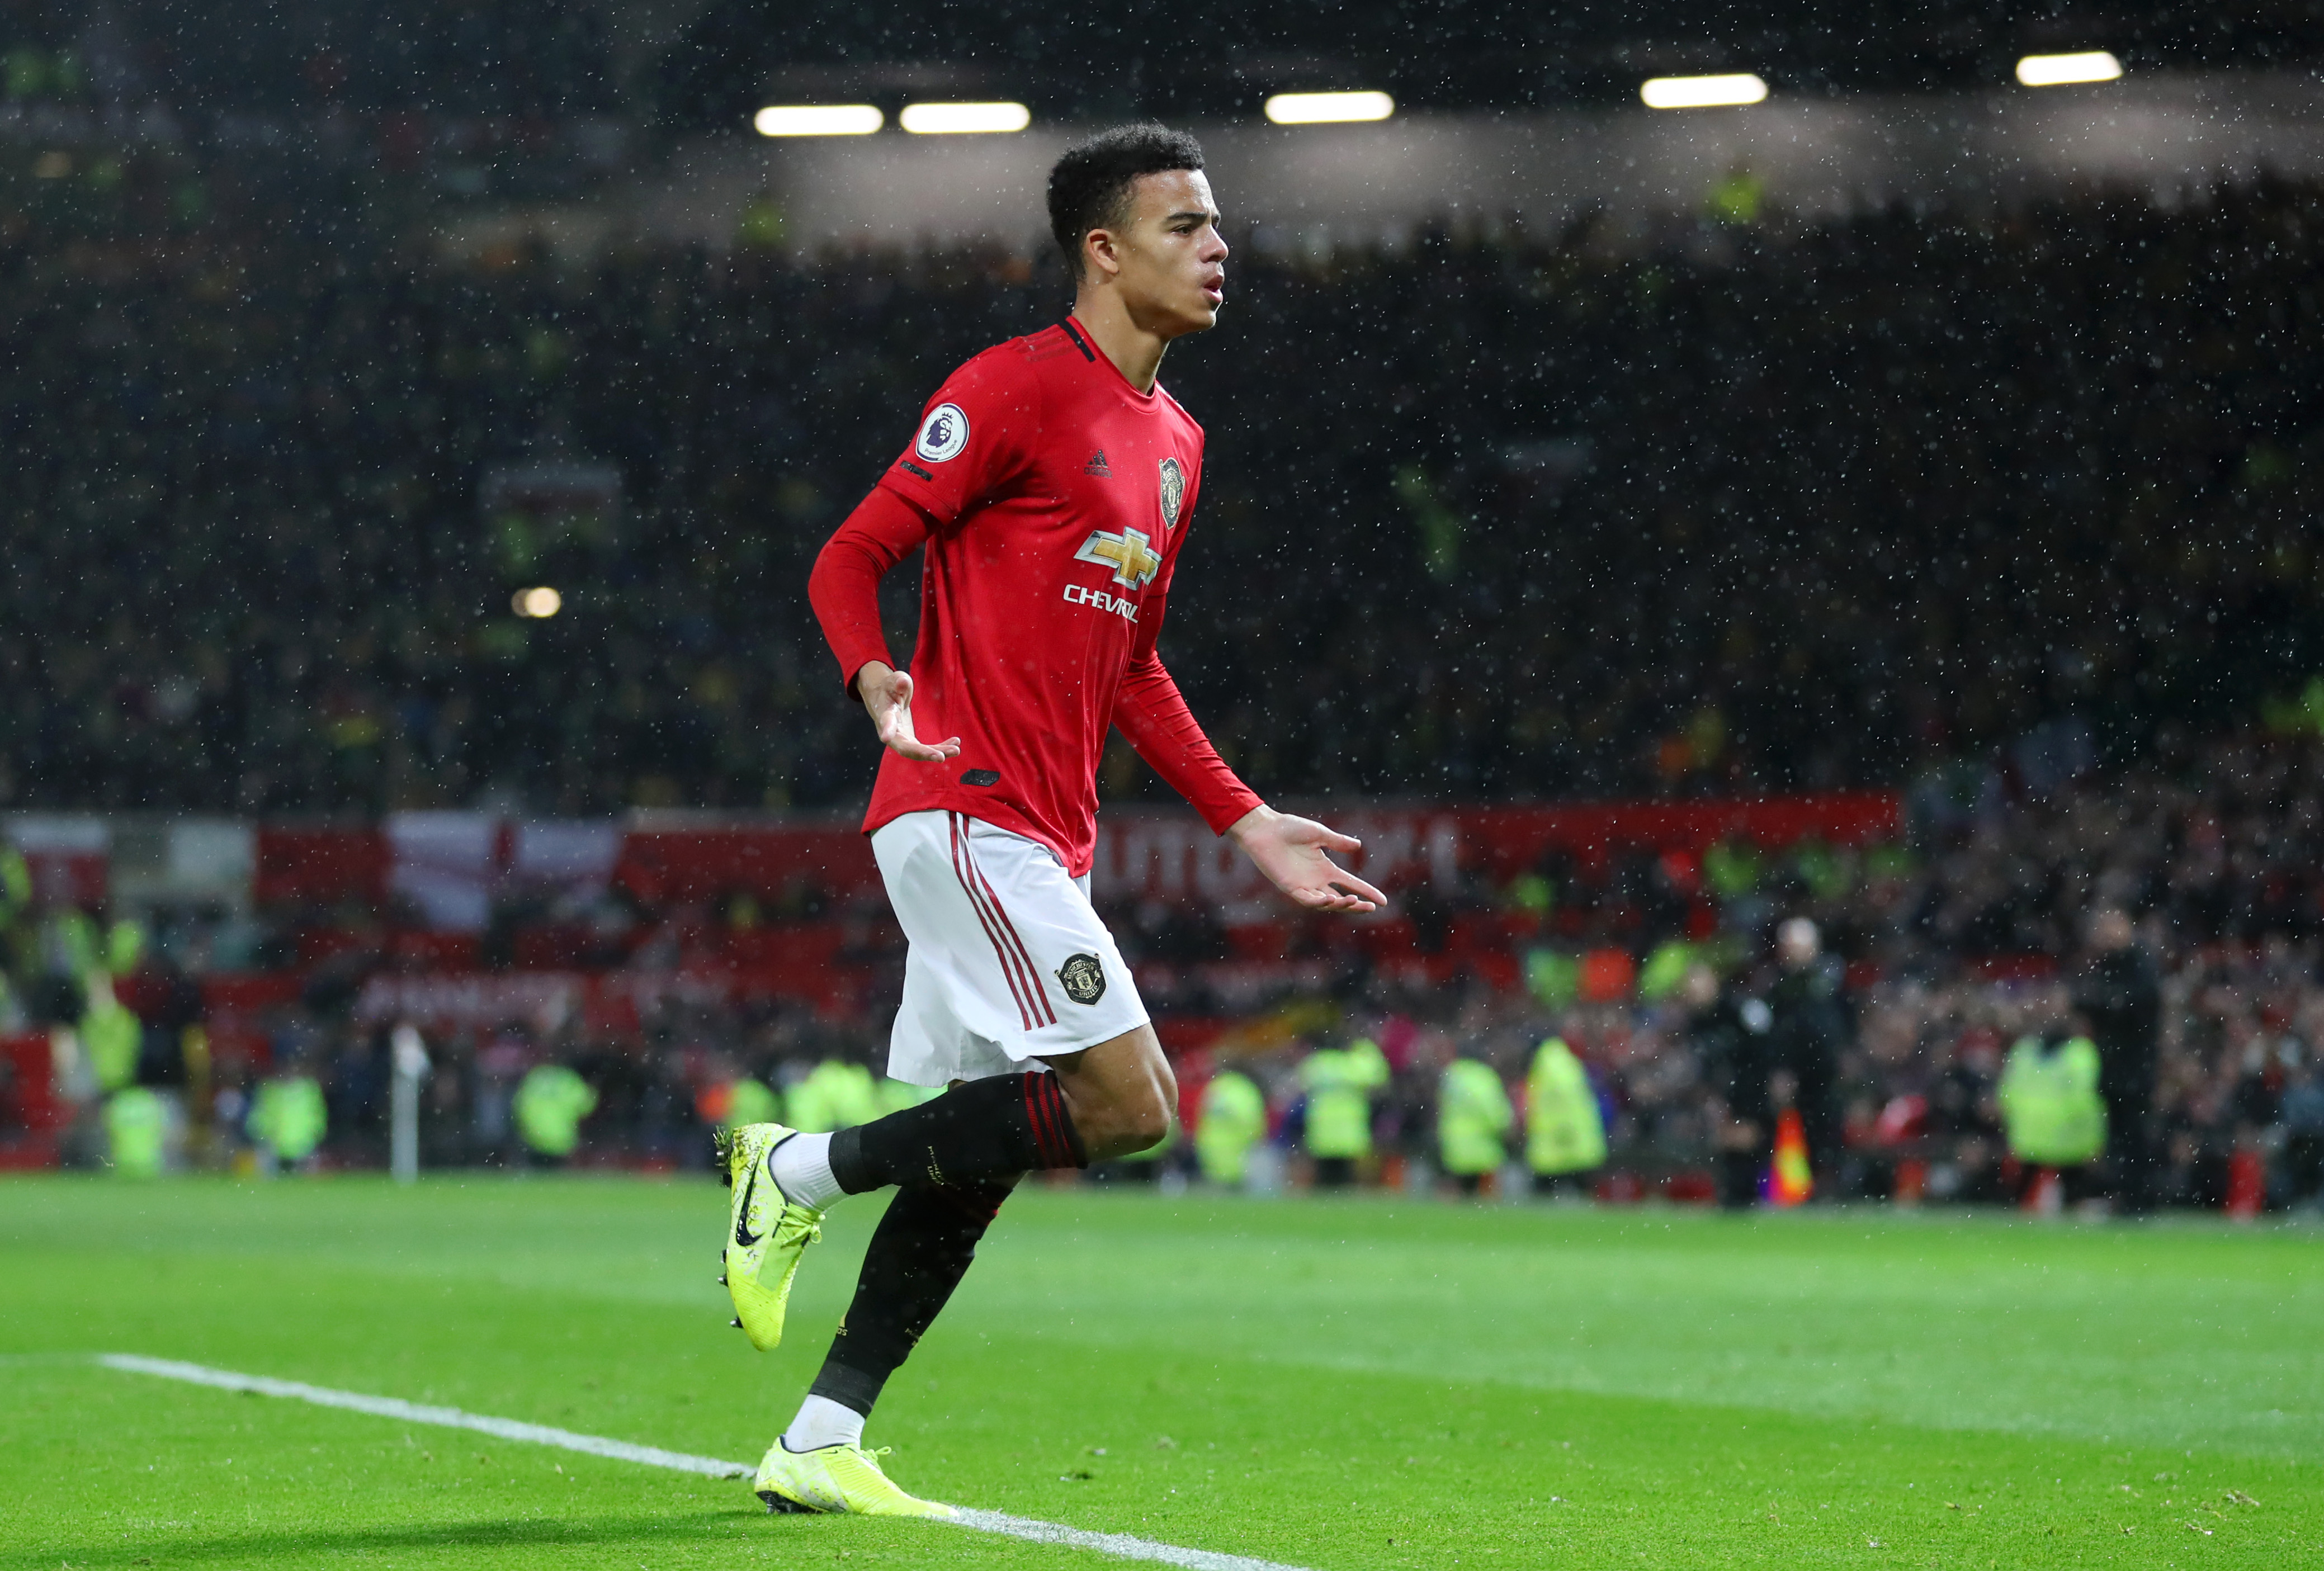 The Mason Greenwood fiasco is a bad look on Manchester United. 